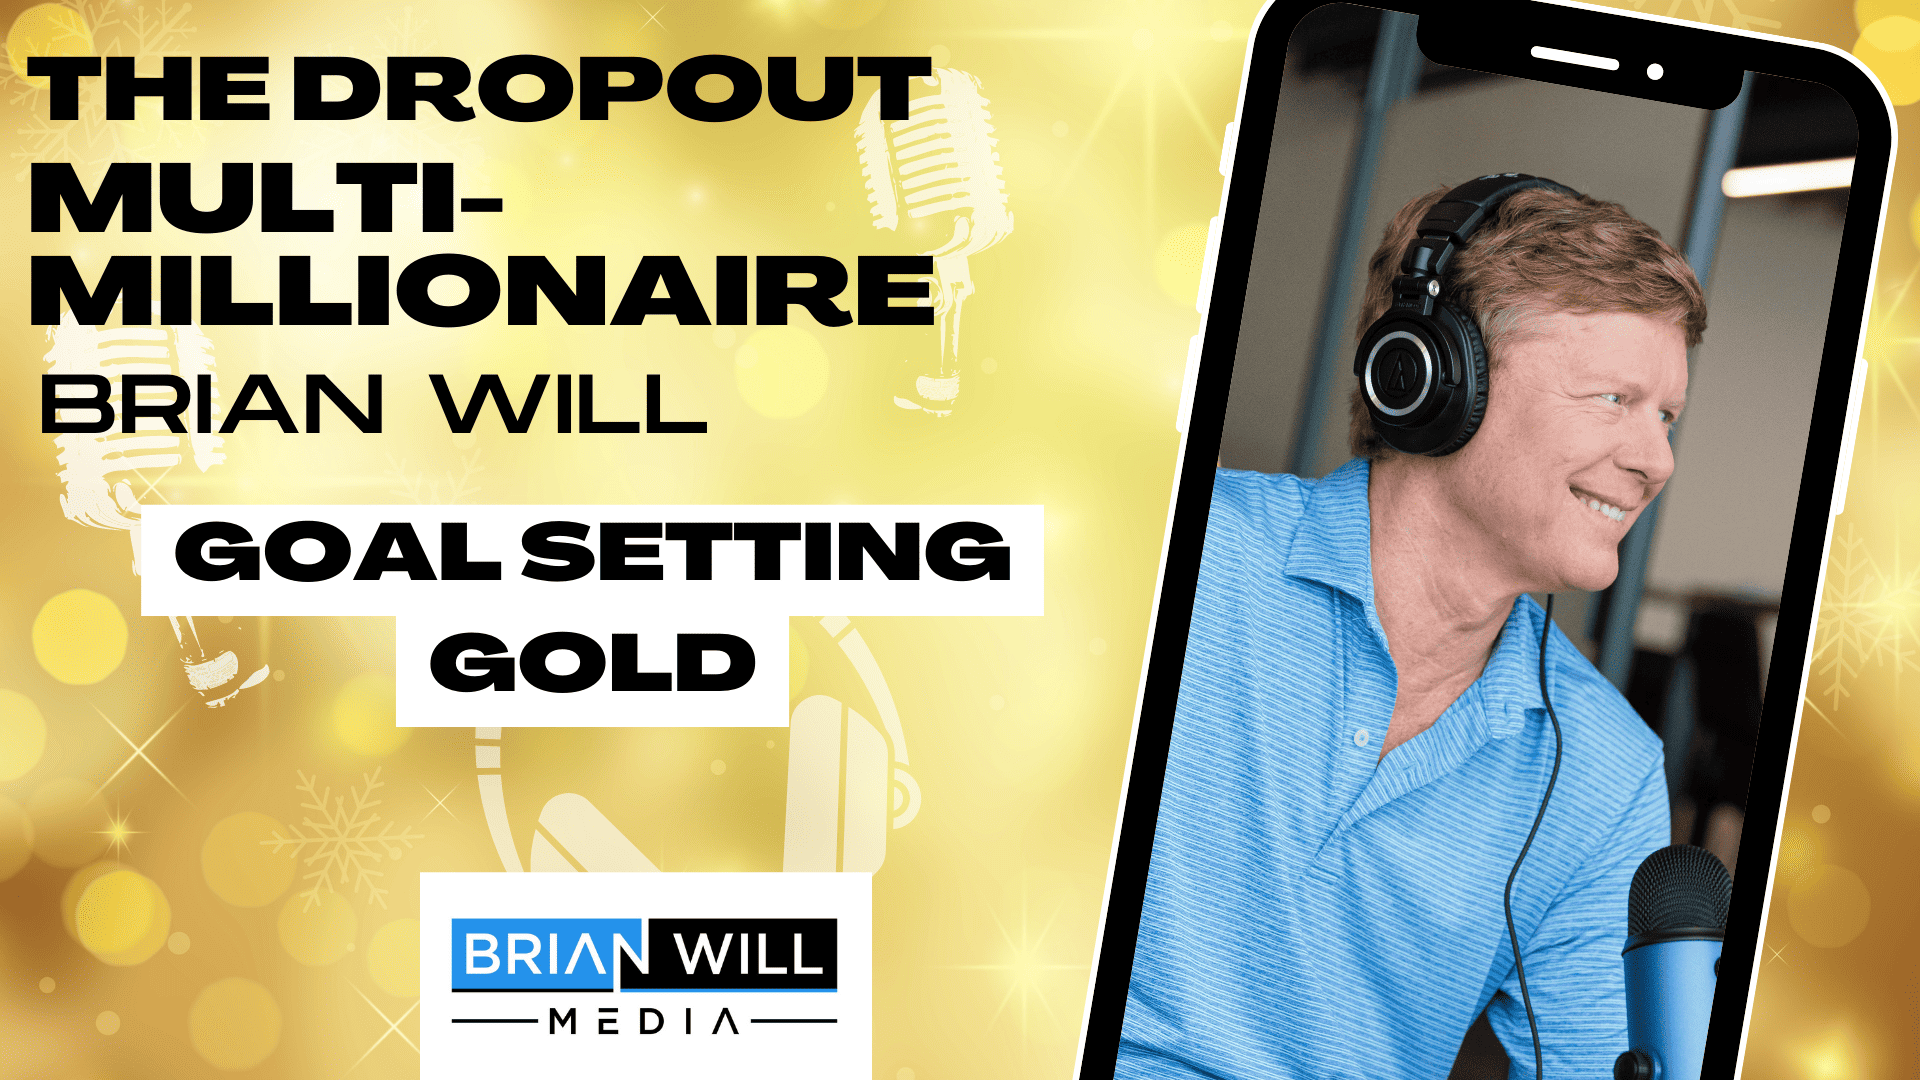 Podcast cover for the episode "Goal Setting Gold" of The Dropout Multi-Millionaire Podcast